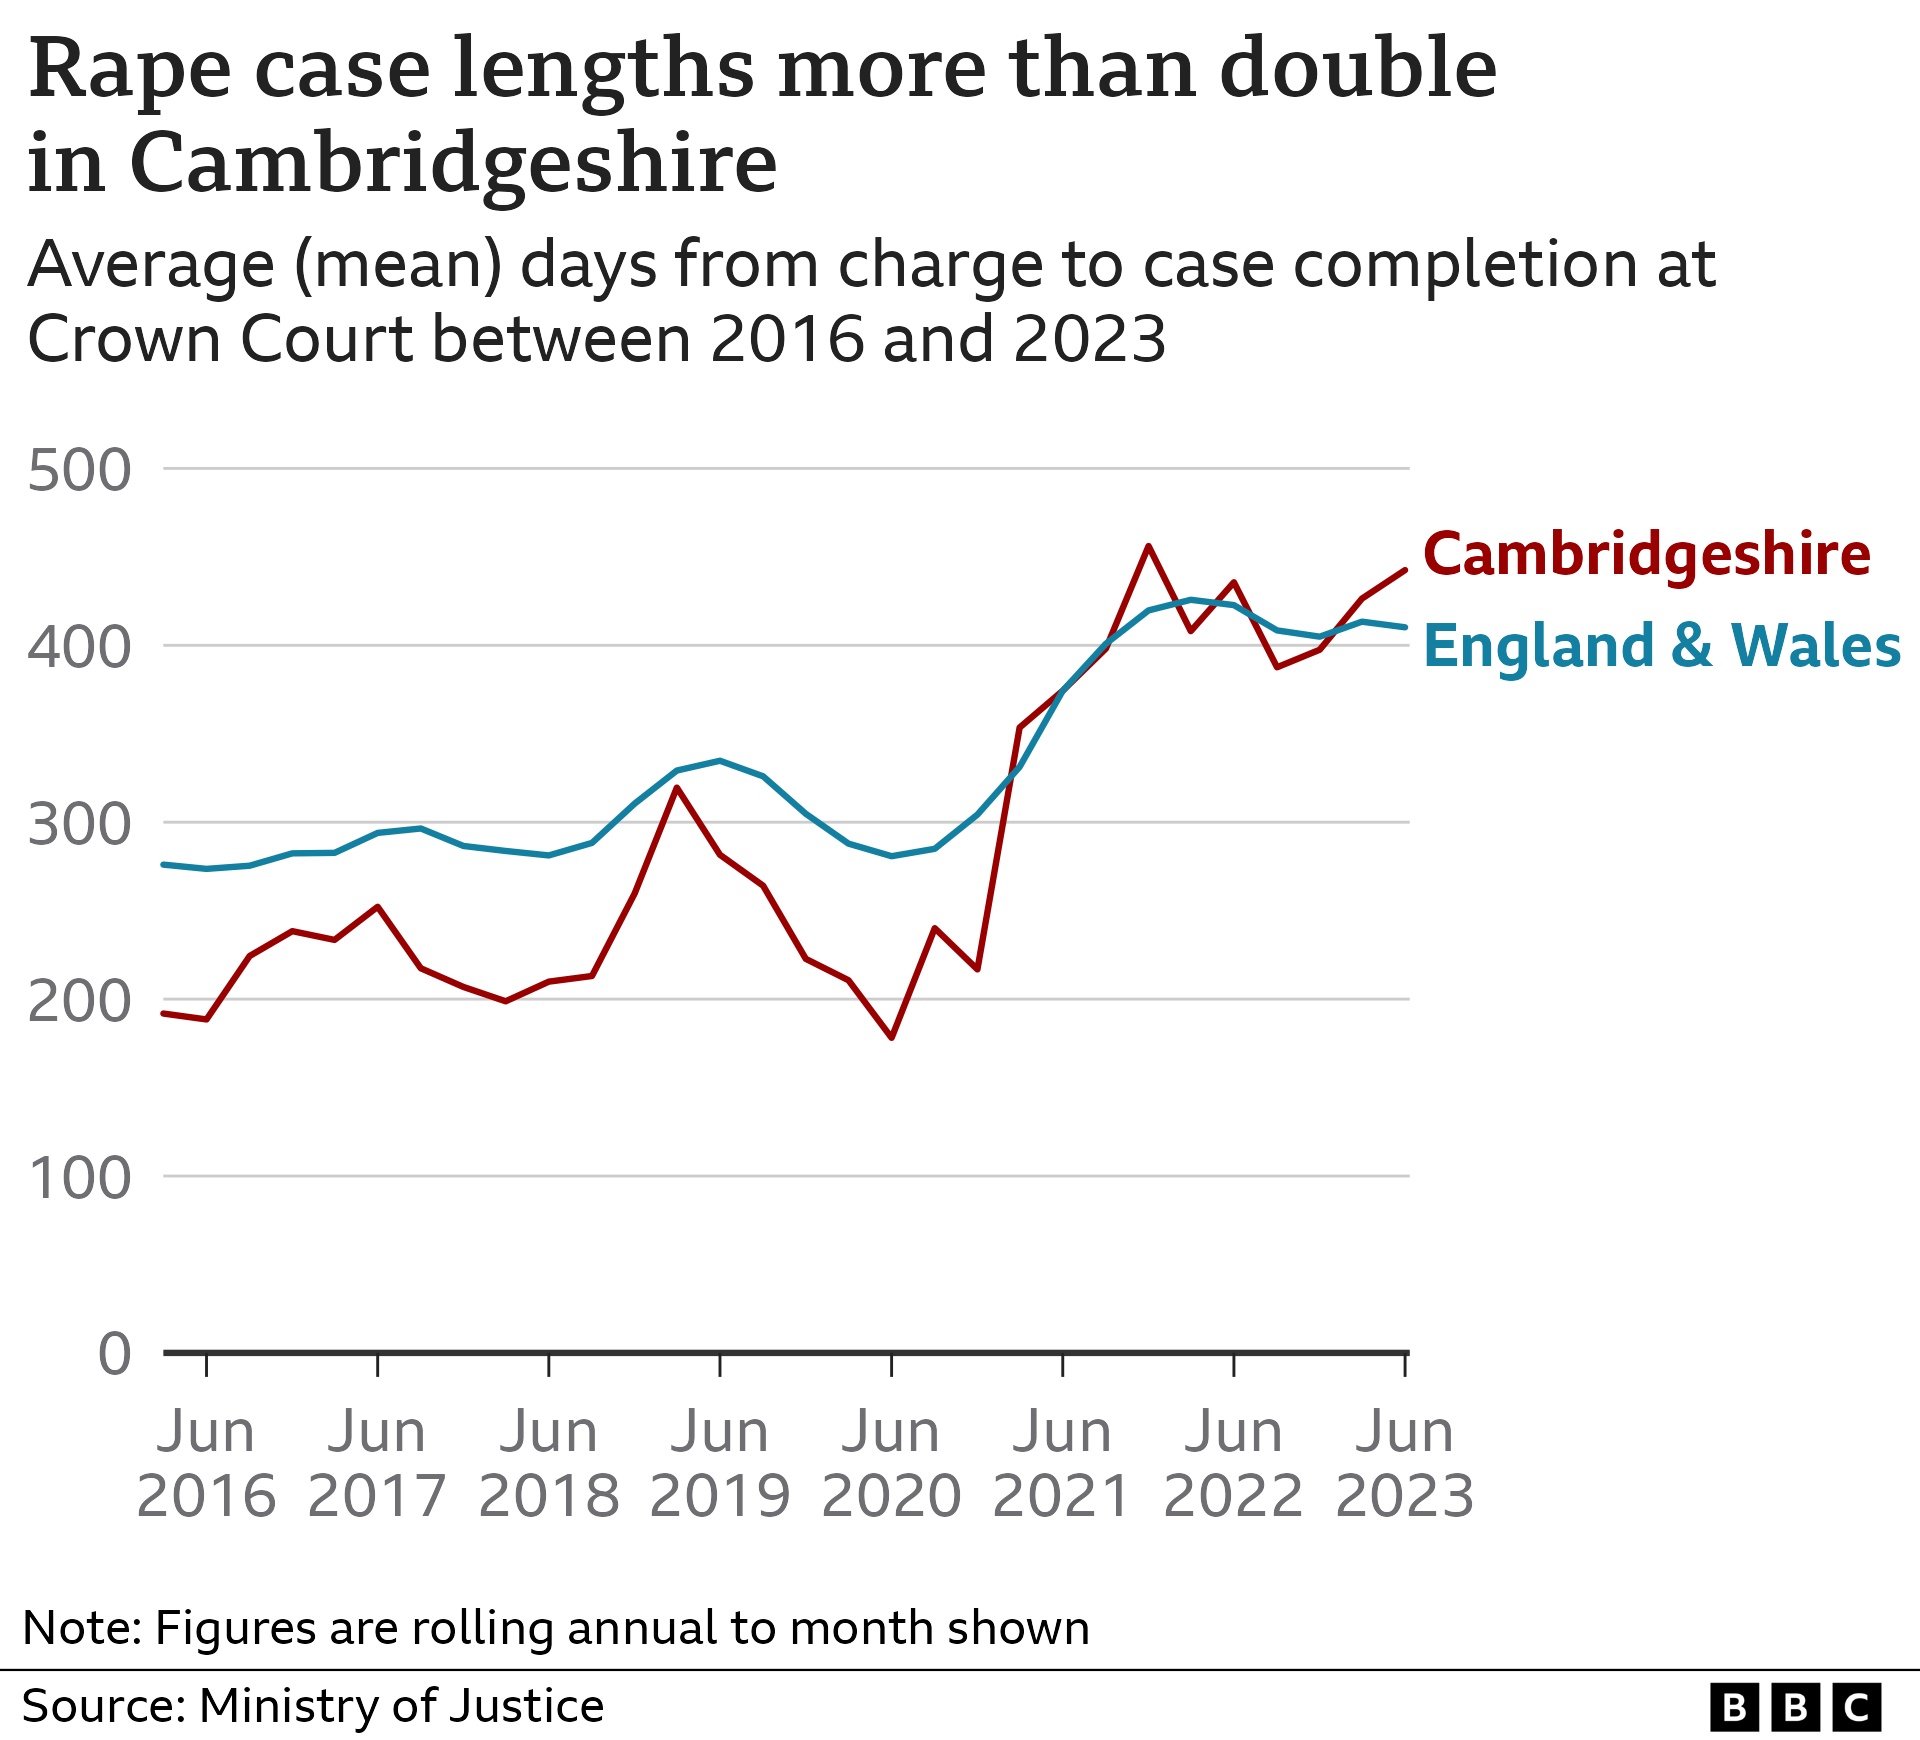 A line graph charting rape case lengths in Cambridgeshire versus nationally in England and Wales.